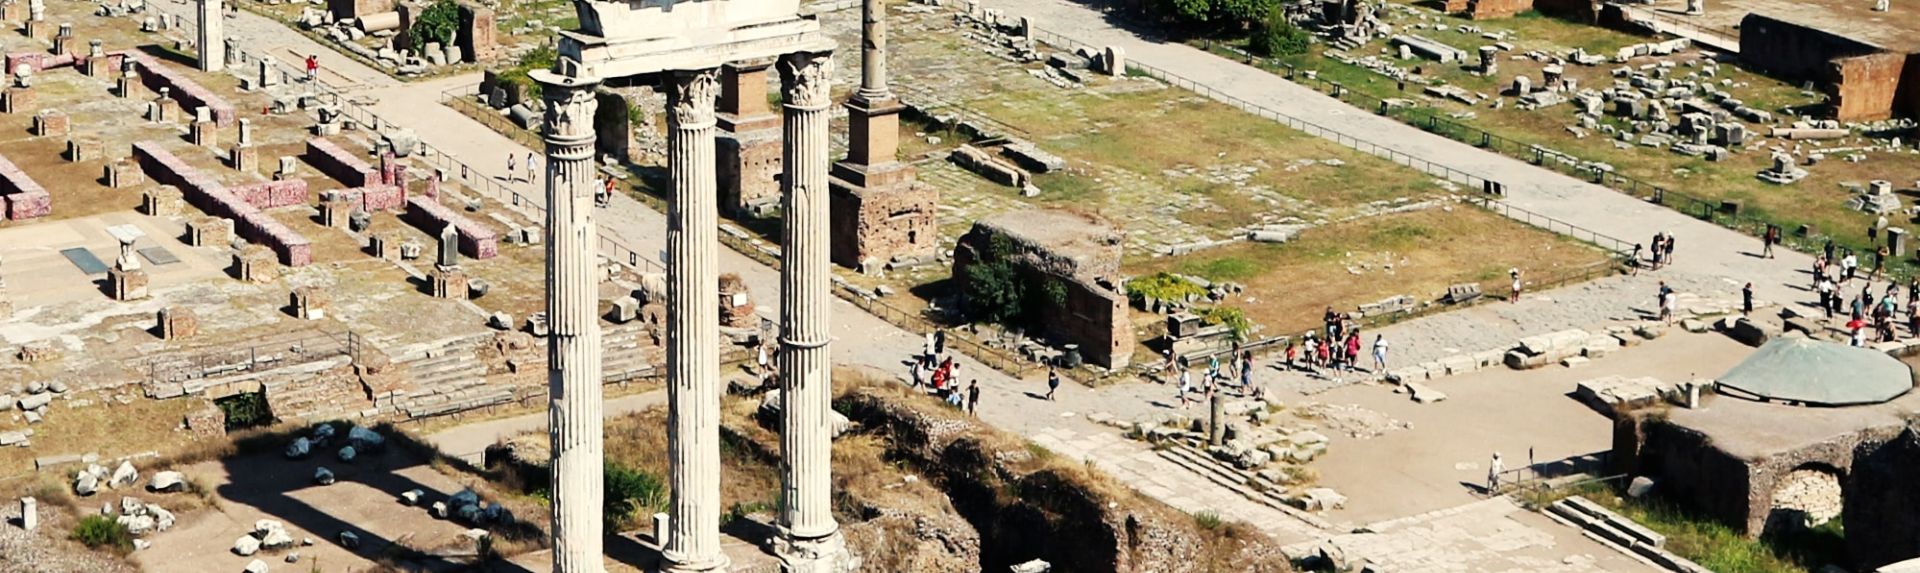 Is entry to the Roman Forum free?